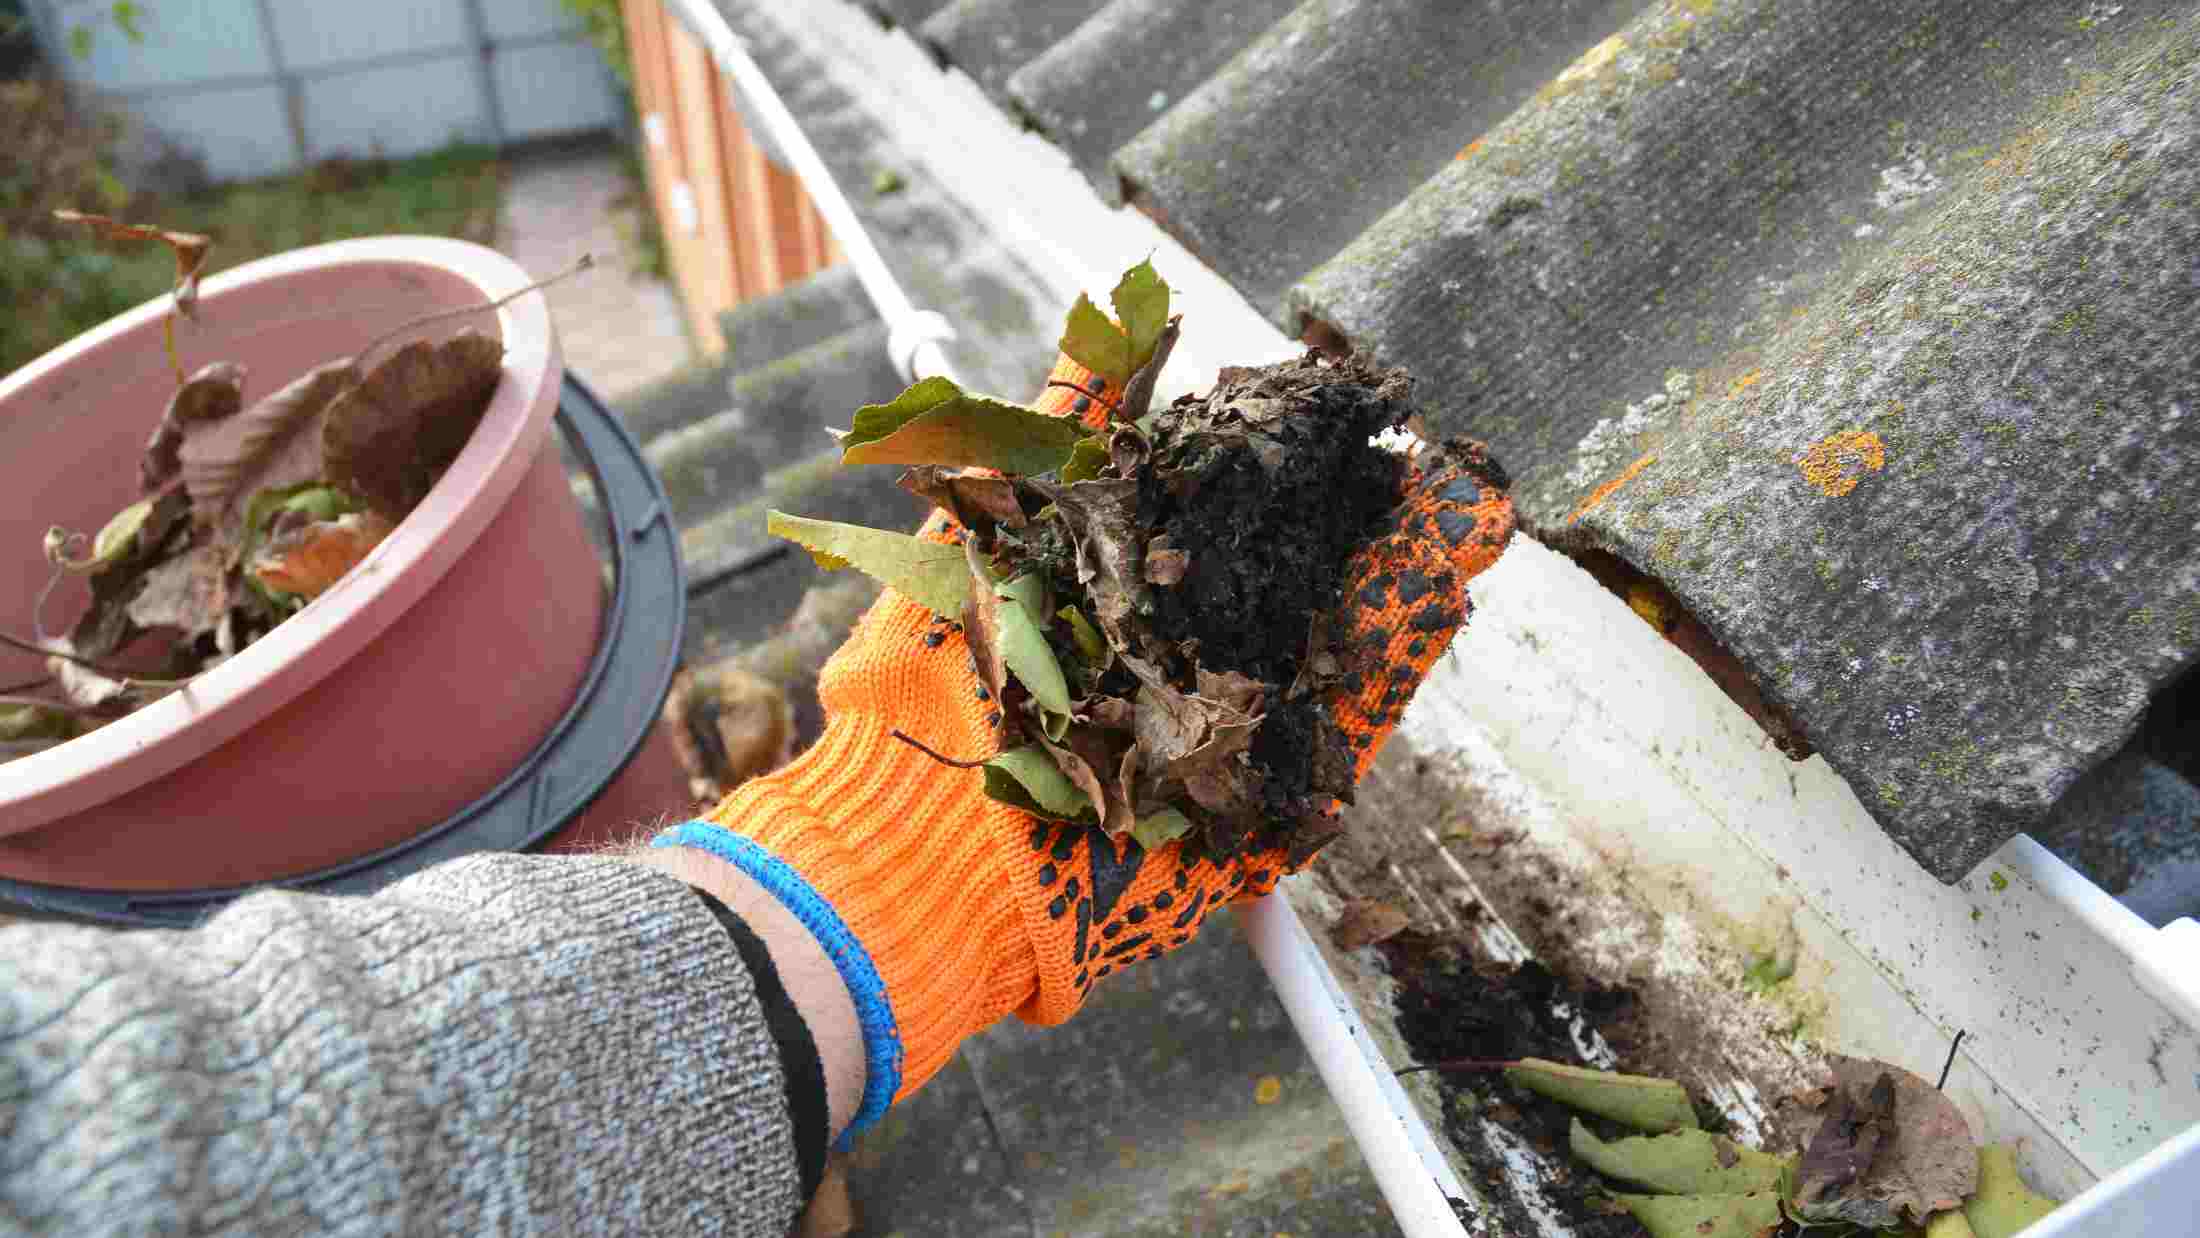 Rain gutter cleaning from leaves in autumn with hand